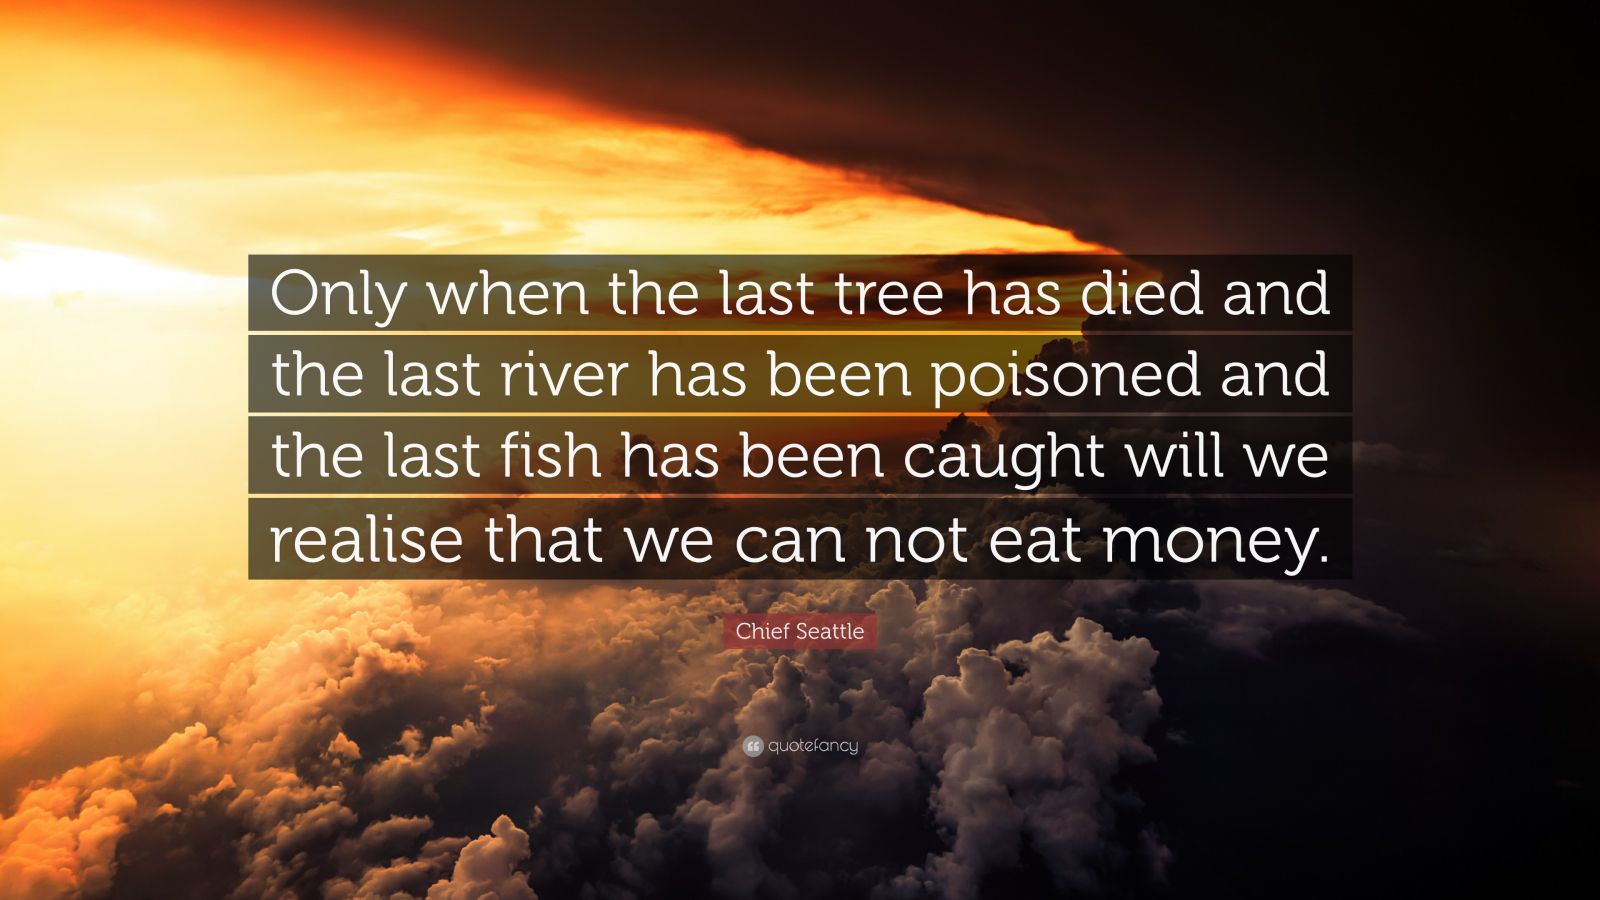 Chief Seattle Quote: “Only when the last tree has died and the last